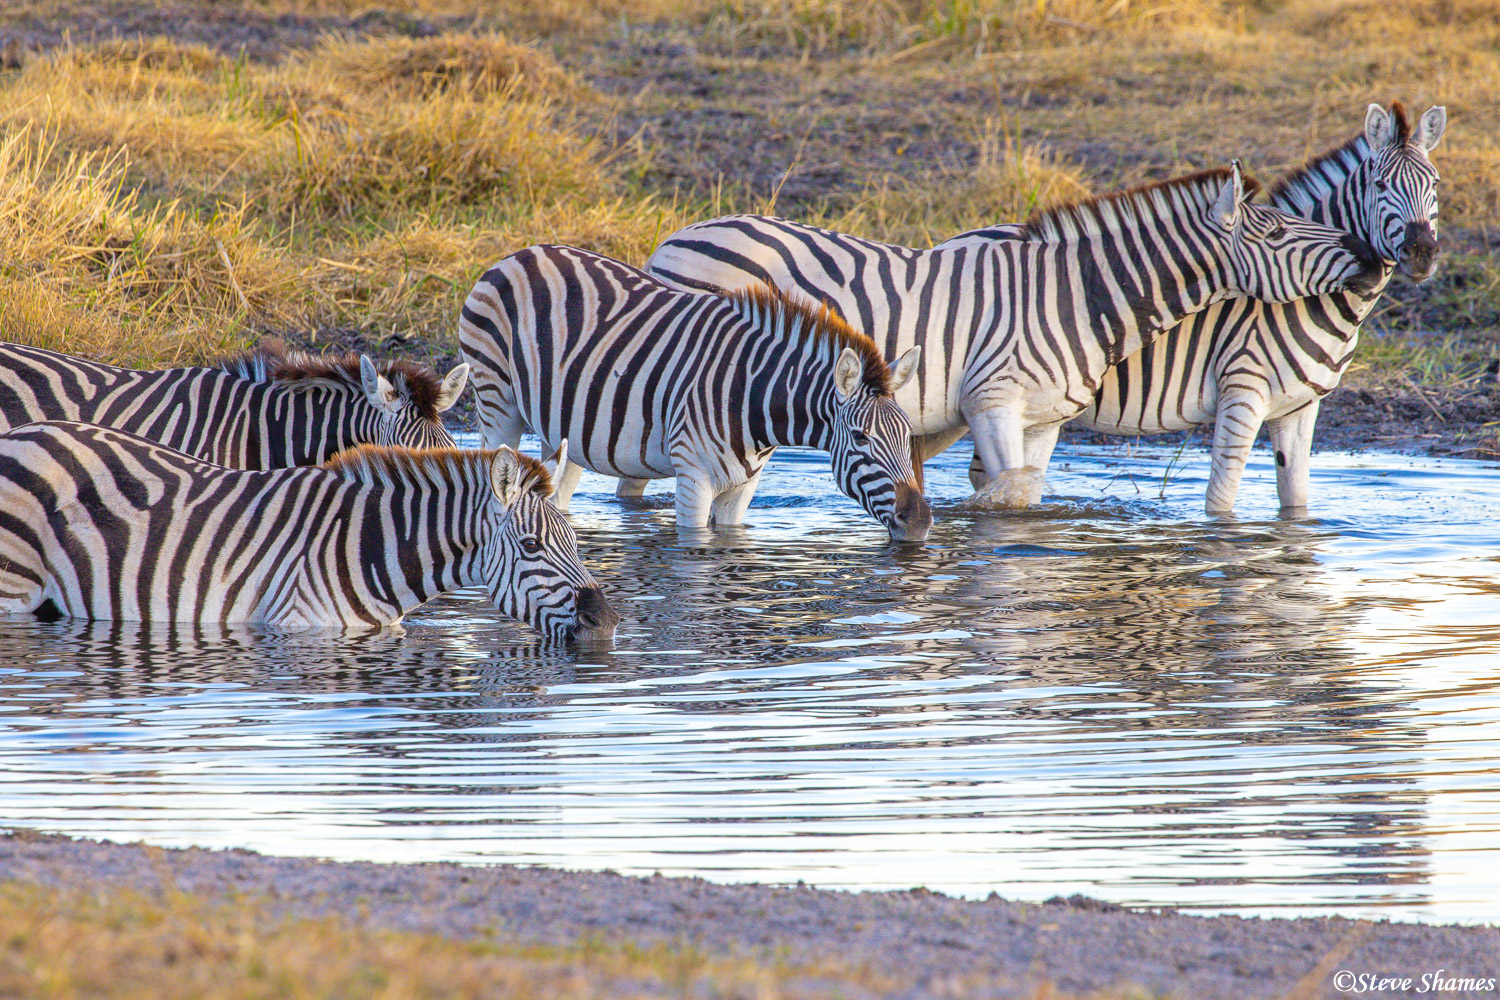 These zebras at Makgadikgadi Pans love to wade right in when they get a drink of water.